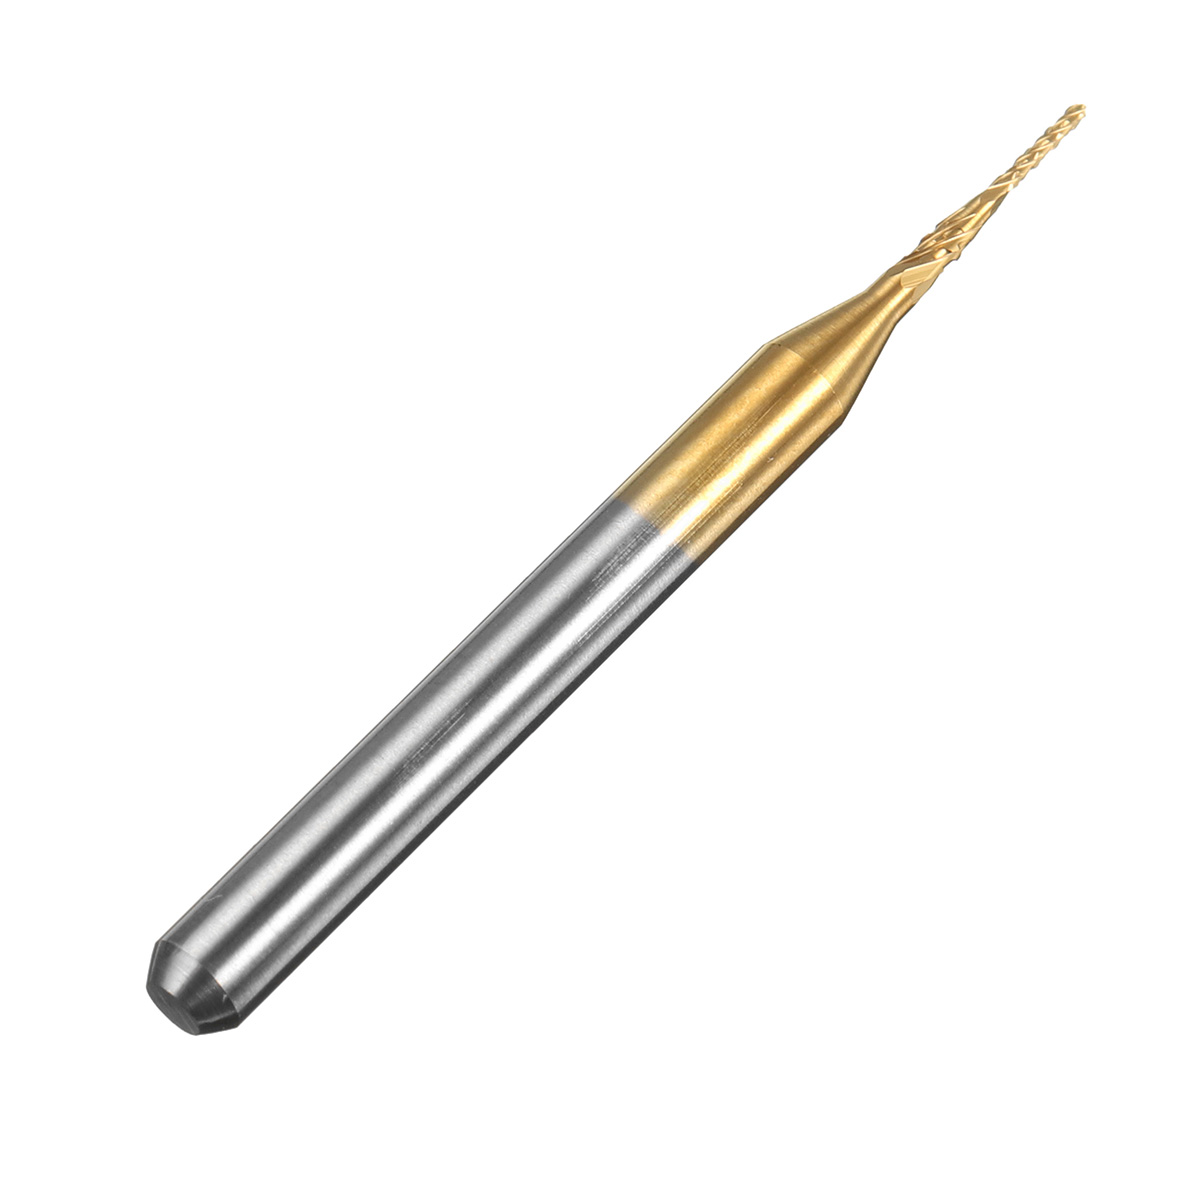 Drillpro-10pcs-08mm-Titanium-Coated-Engraving-Milling-Cutter-Carbide-End-Mill-Rotary-Burr-1531799-7